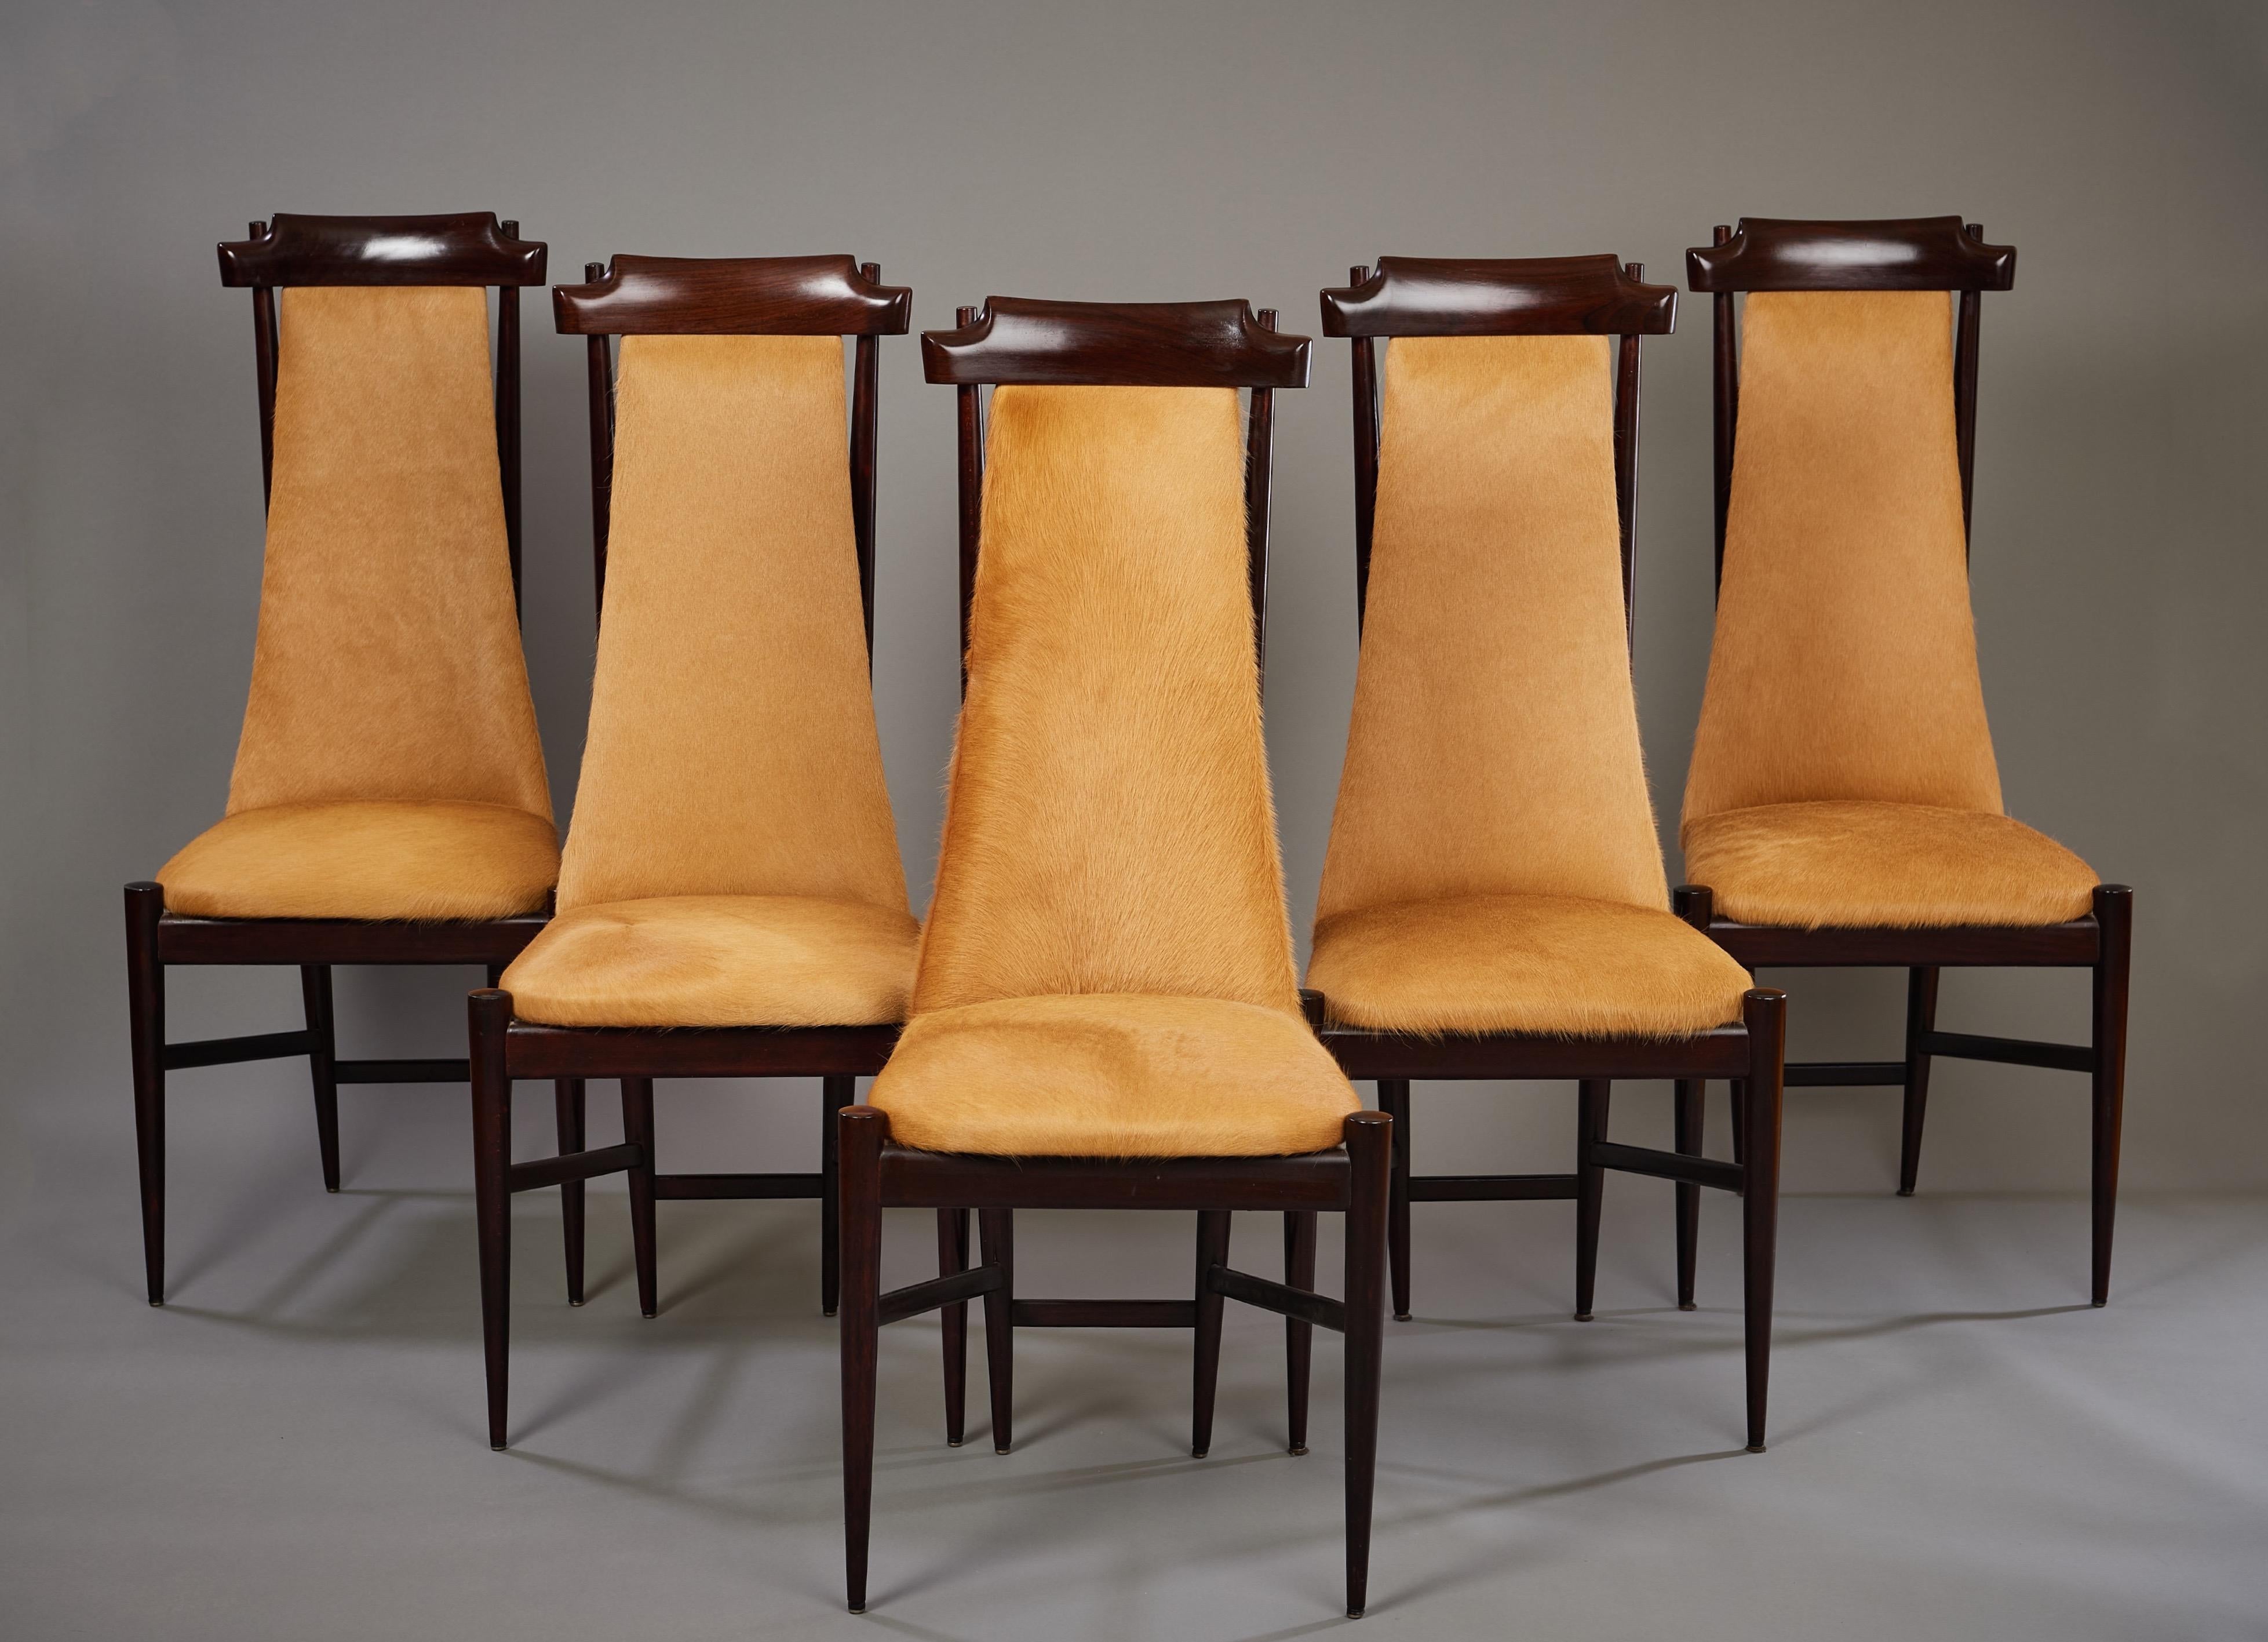 Sergio Rodrigues Six Dining Chairs in Wood and Tan Cowhide, Brazil, 1960s For Sale 13